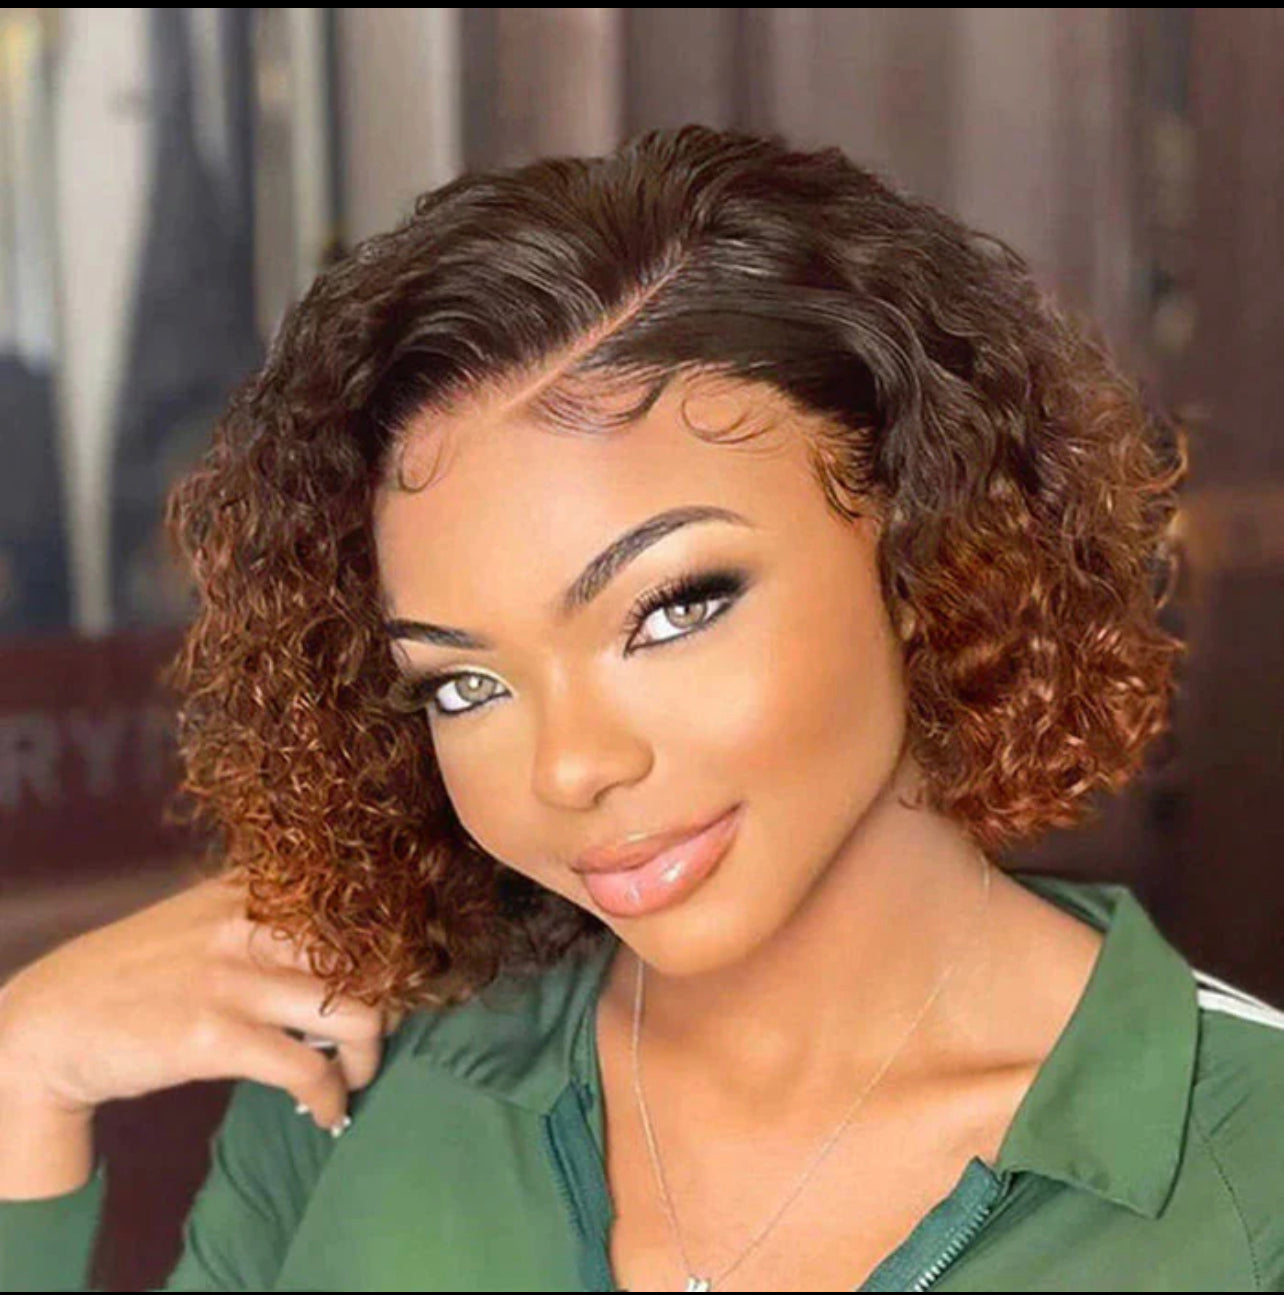 10 Inches Trendy Mix Brown Short Cut Curly HD Lace Glueless Side Part Wig